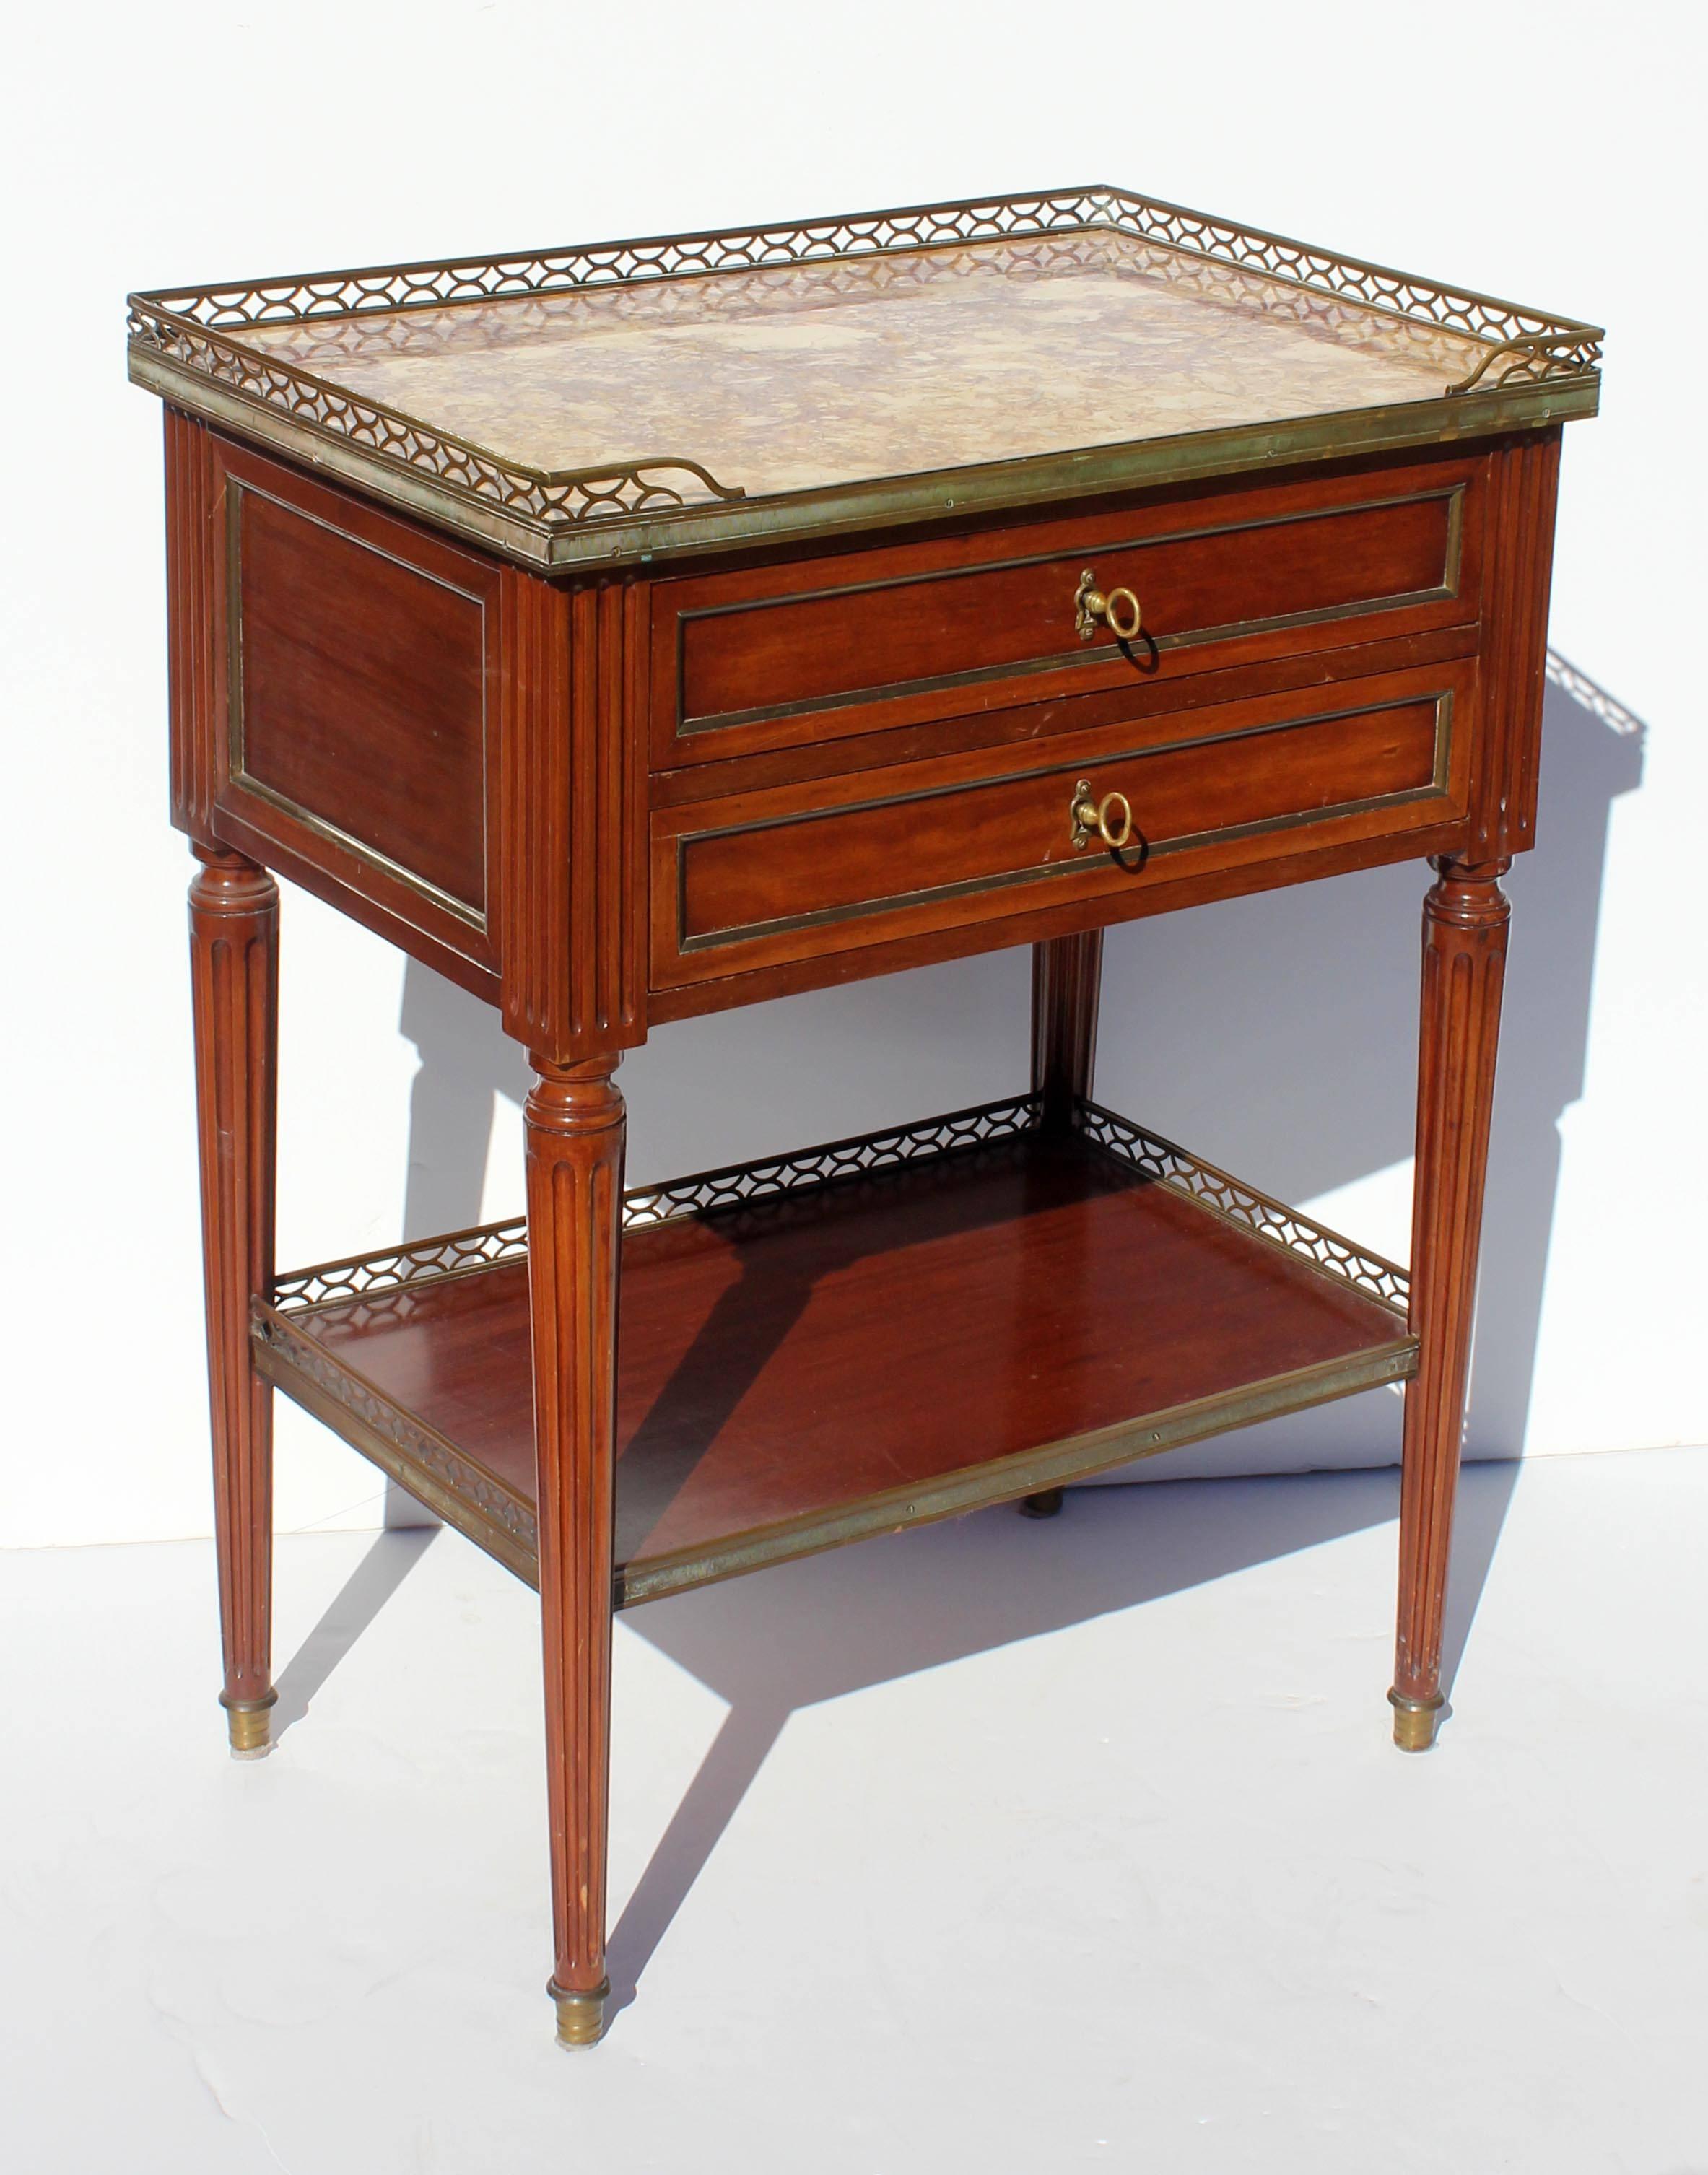 Antique French Louis XVI style marble top two-drawer side table. Mahogany with brass gallery and trim.